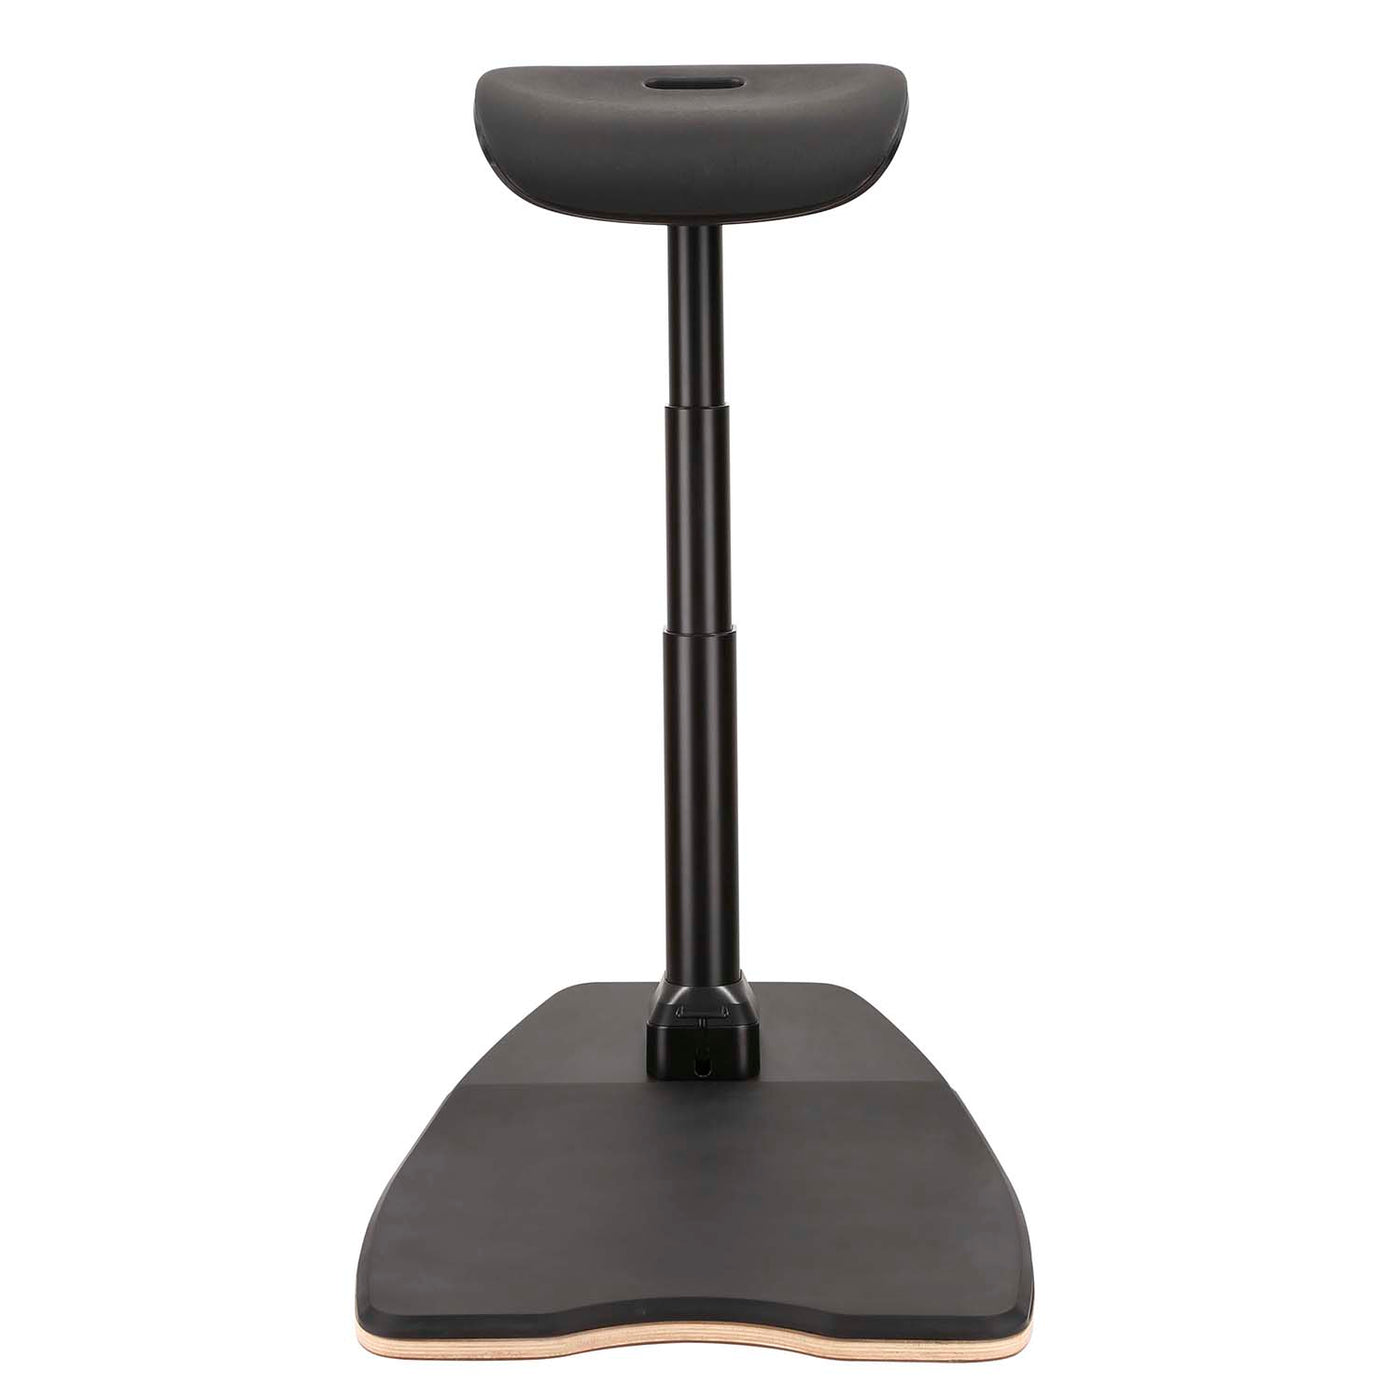 Maclean MC-872 Ergonomic Office Stool with Height Adjustment, Standing Stool